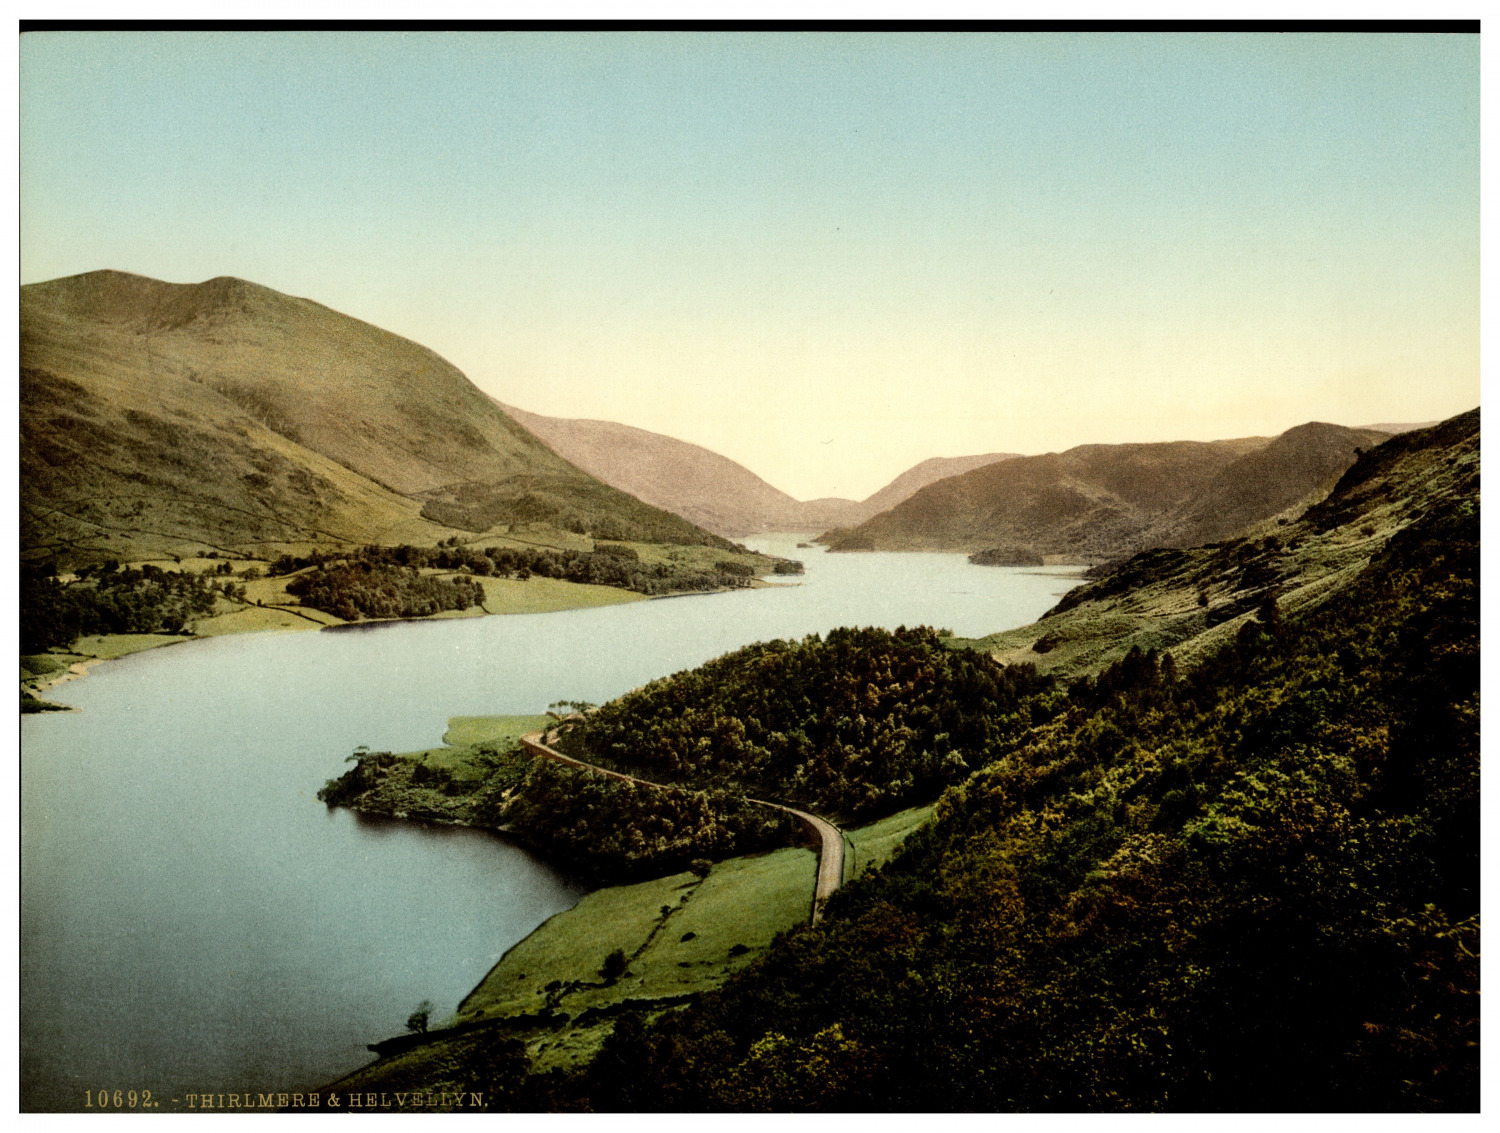 England. Lake District. Thirlmere and Helvellyn. Vintage Photochrome by P.Z, P